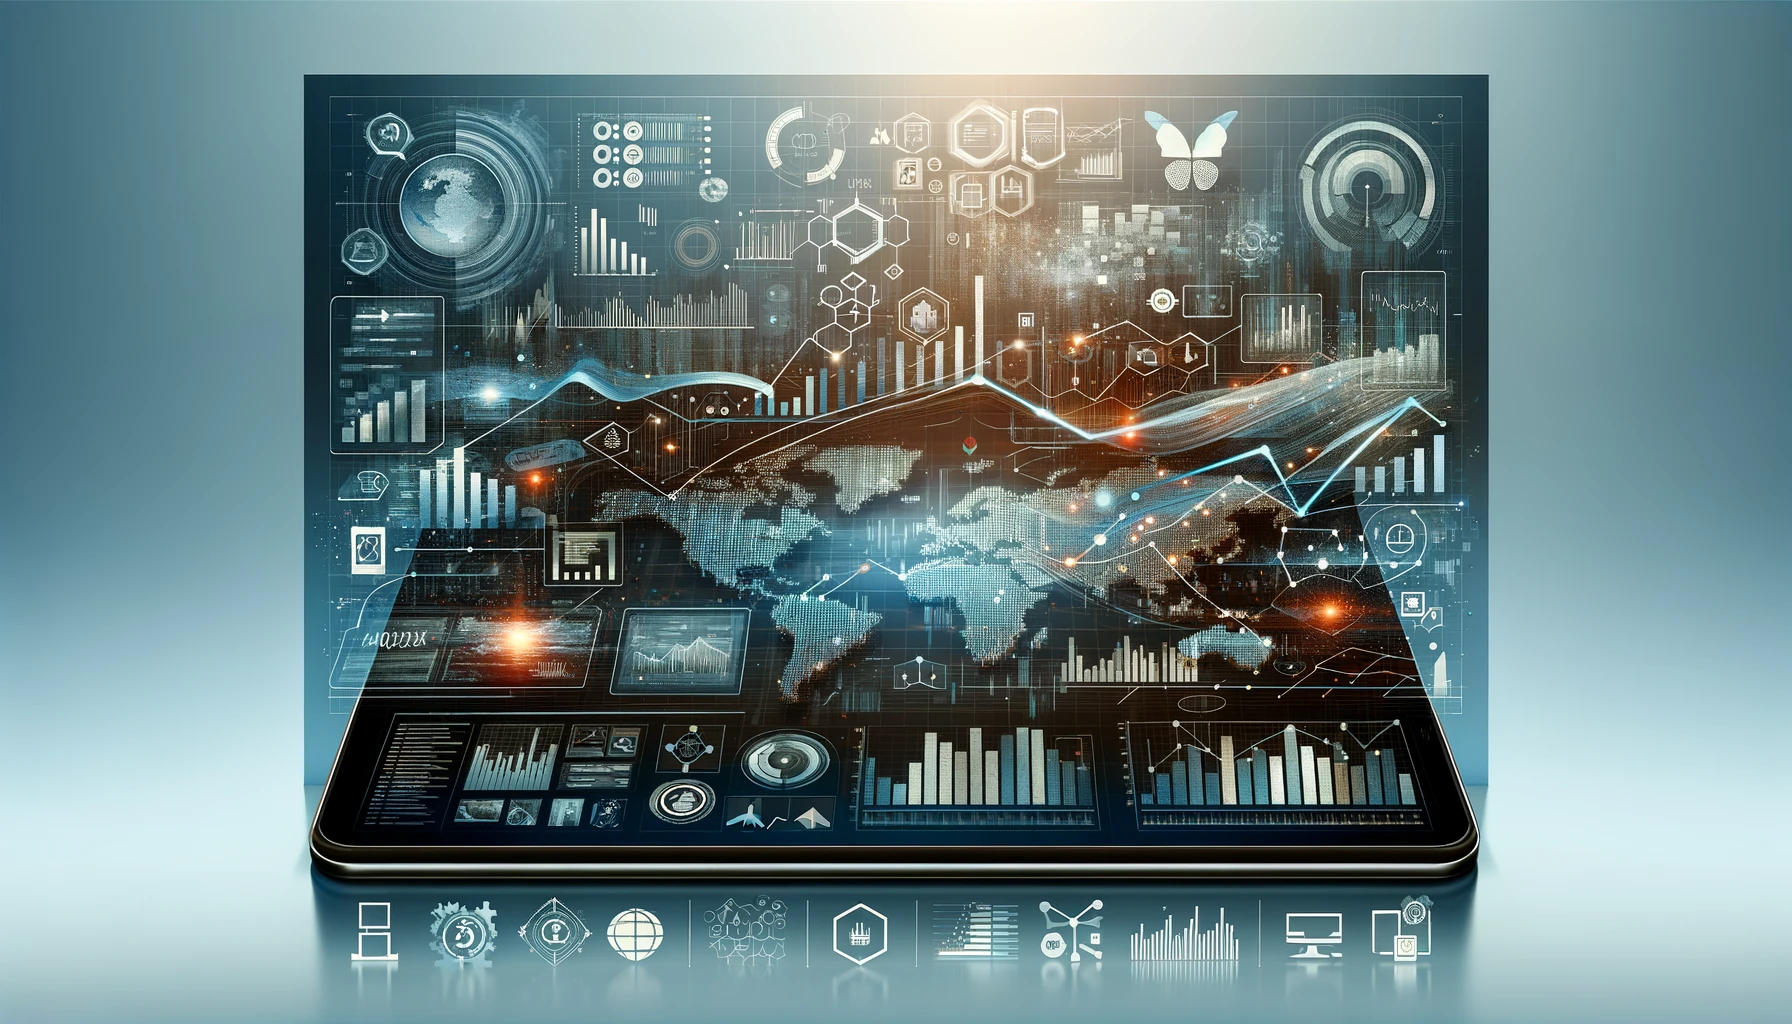 A widescreen digital cover image depicting the transformative role of data analytics in business, with abstract data flow designs, graphs, charts, and digital interfaces in corporate blue and gray tones, highlighting sectors like finance, retail, and technology.